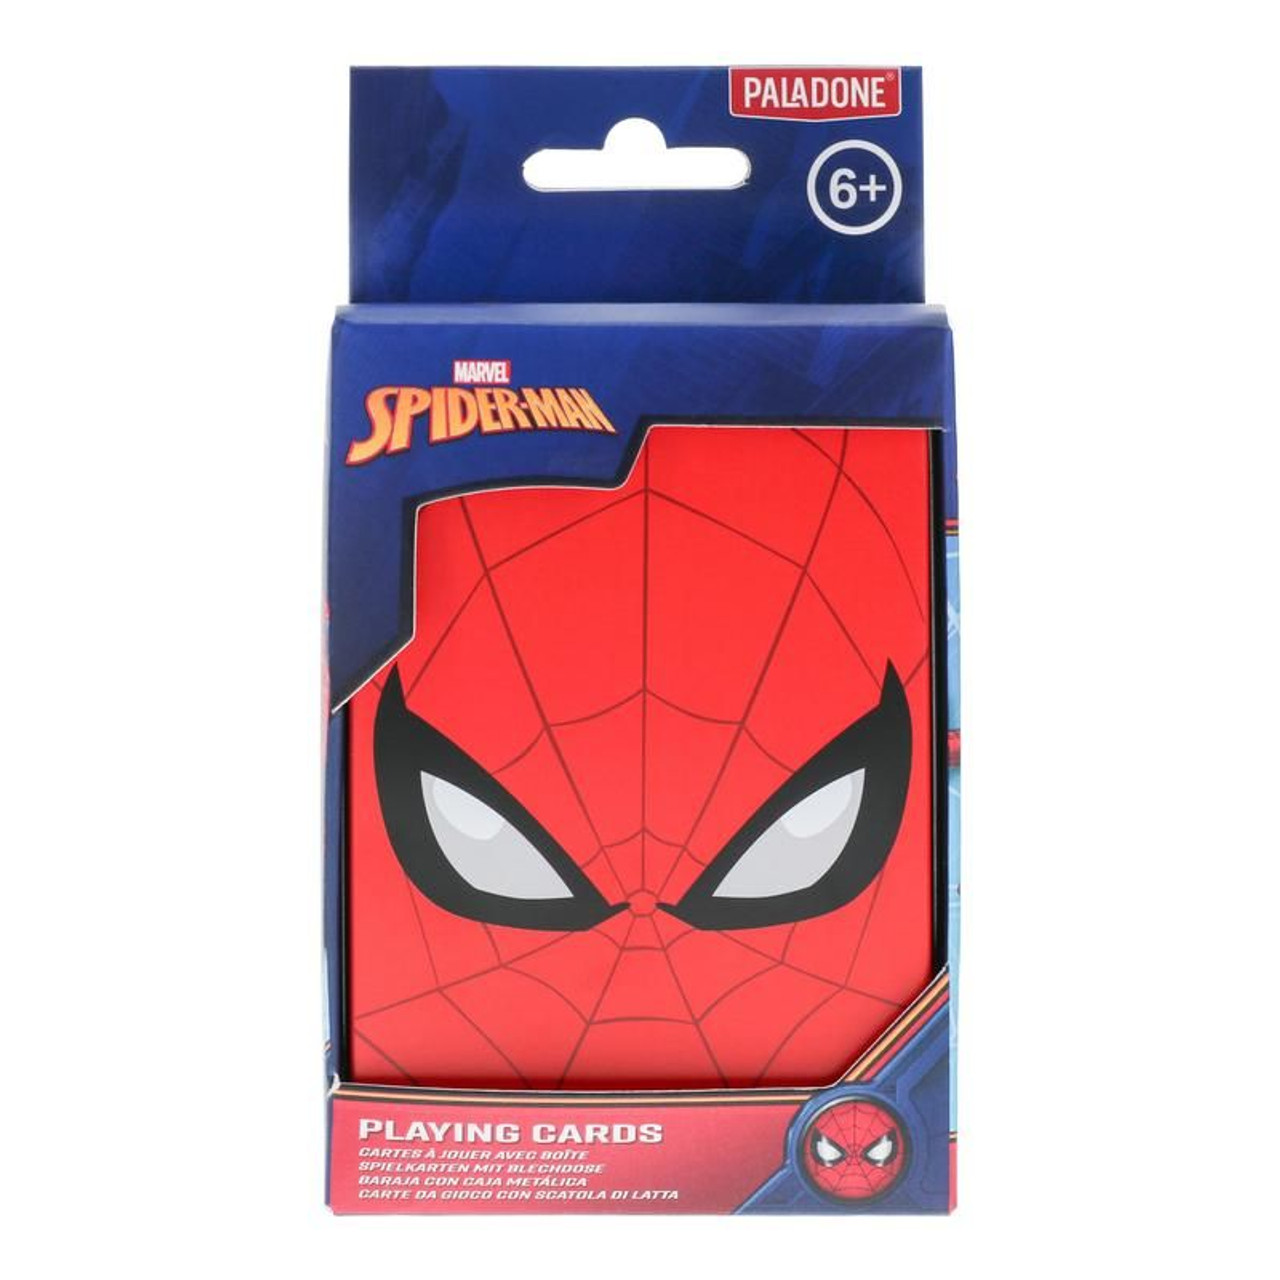 Buy Spider-Man Villains 3,000 Piece Jigsaw Puzzle with Character Key